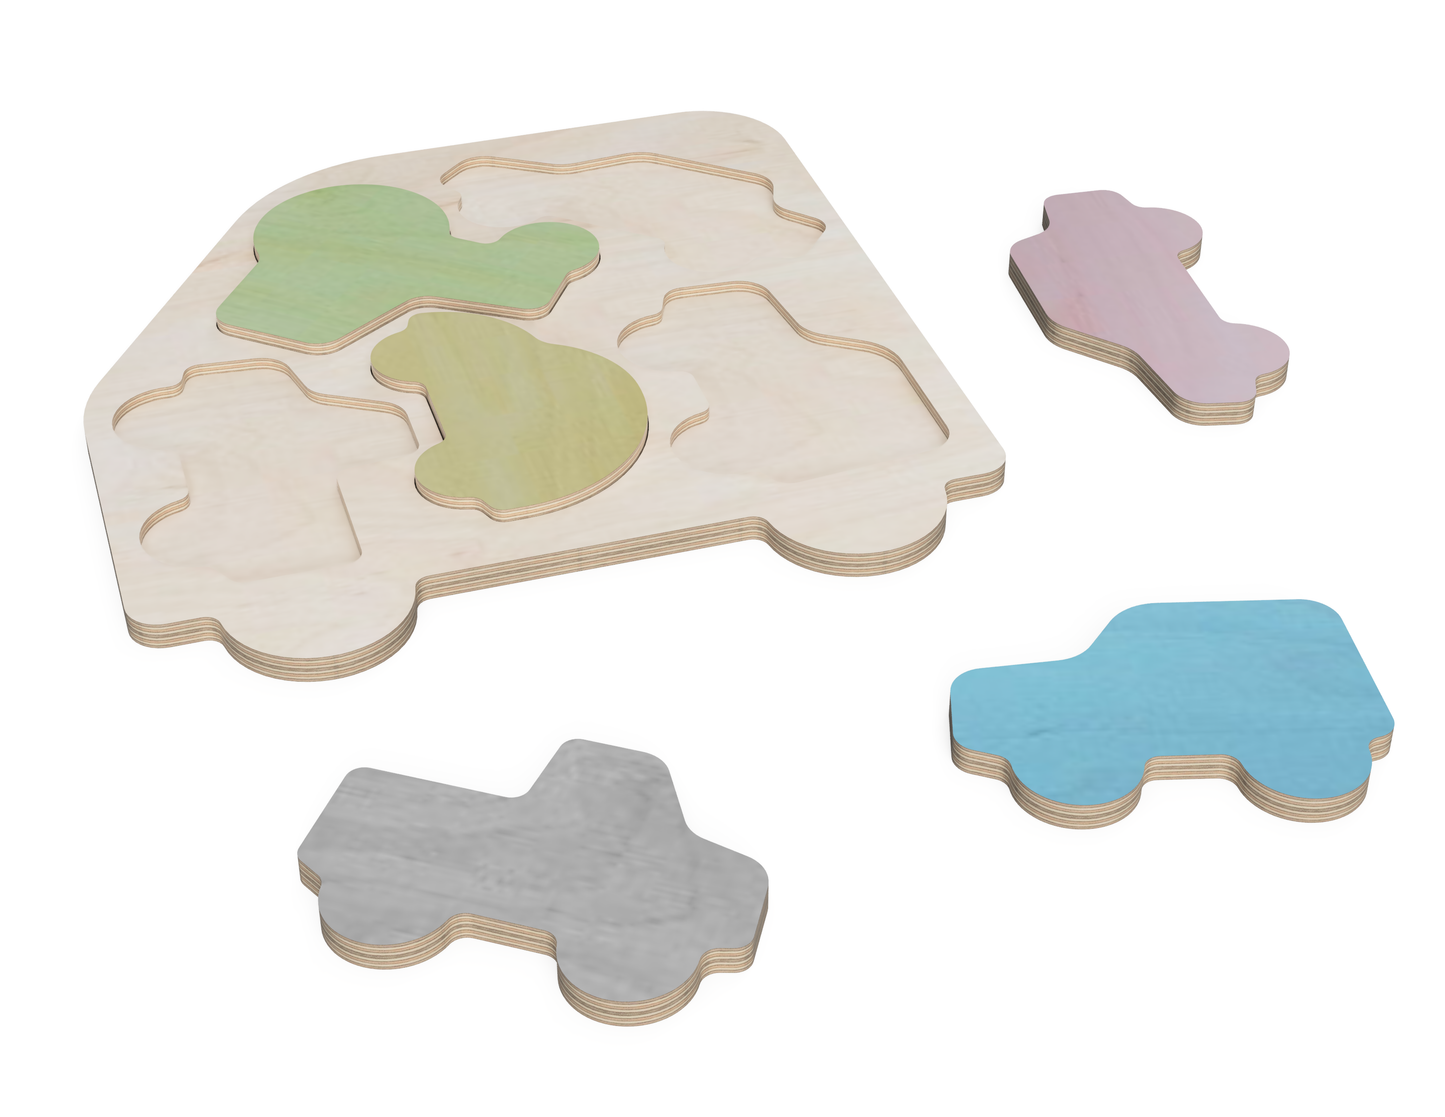 Stepping Stones "Cars" DXF Files